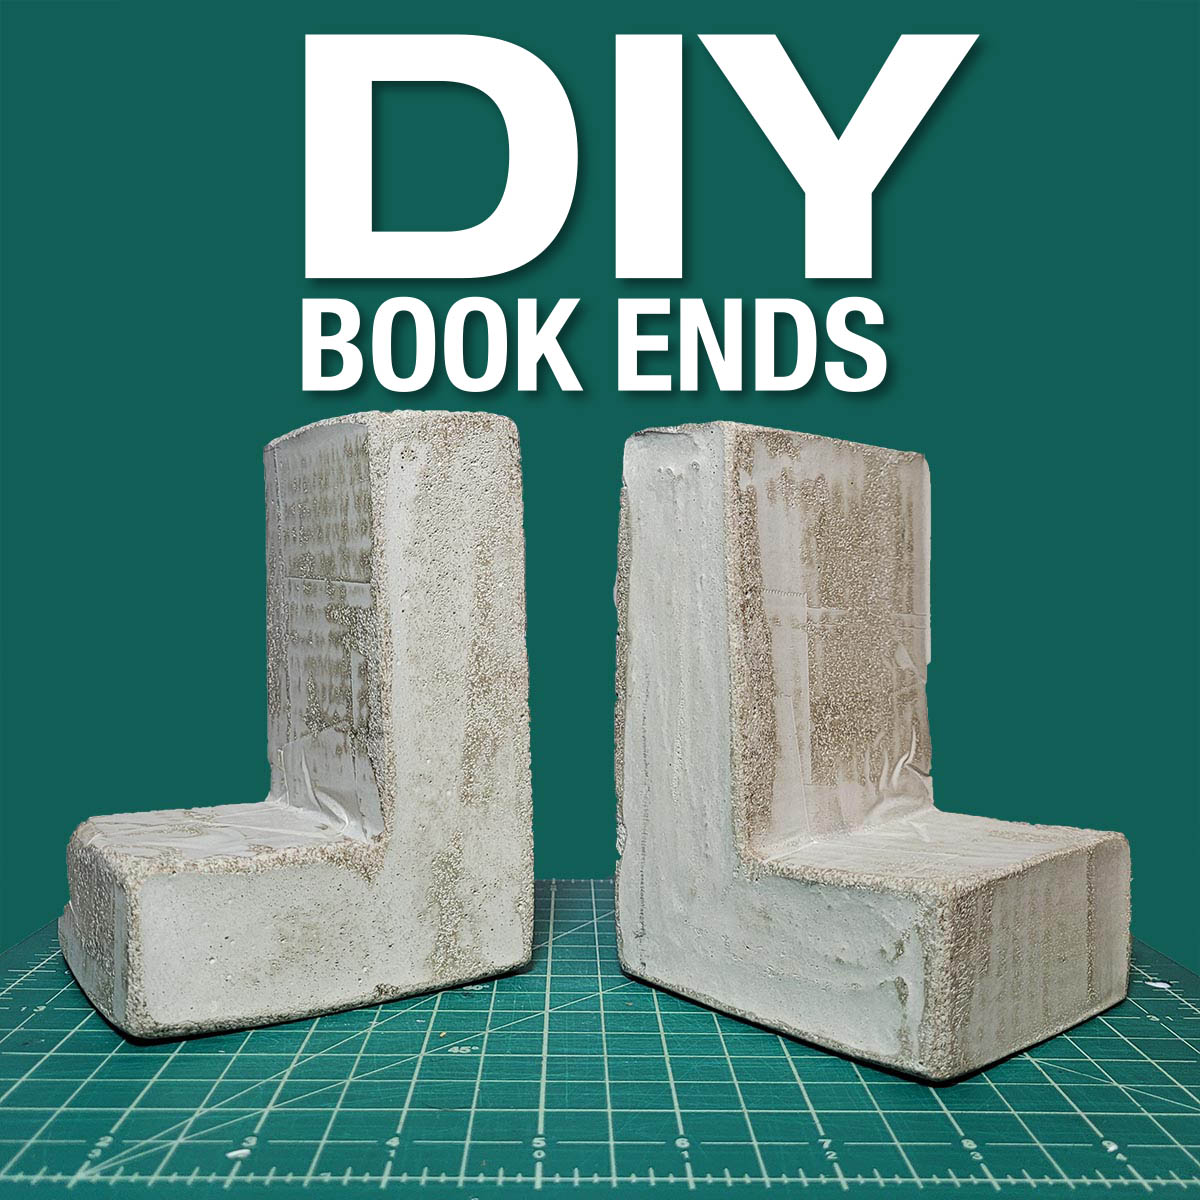 book ends made from cement diy project